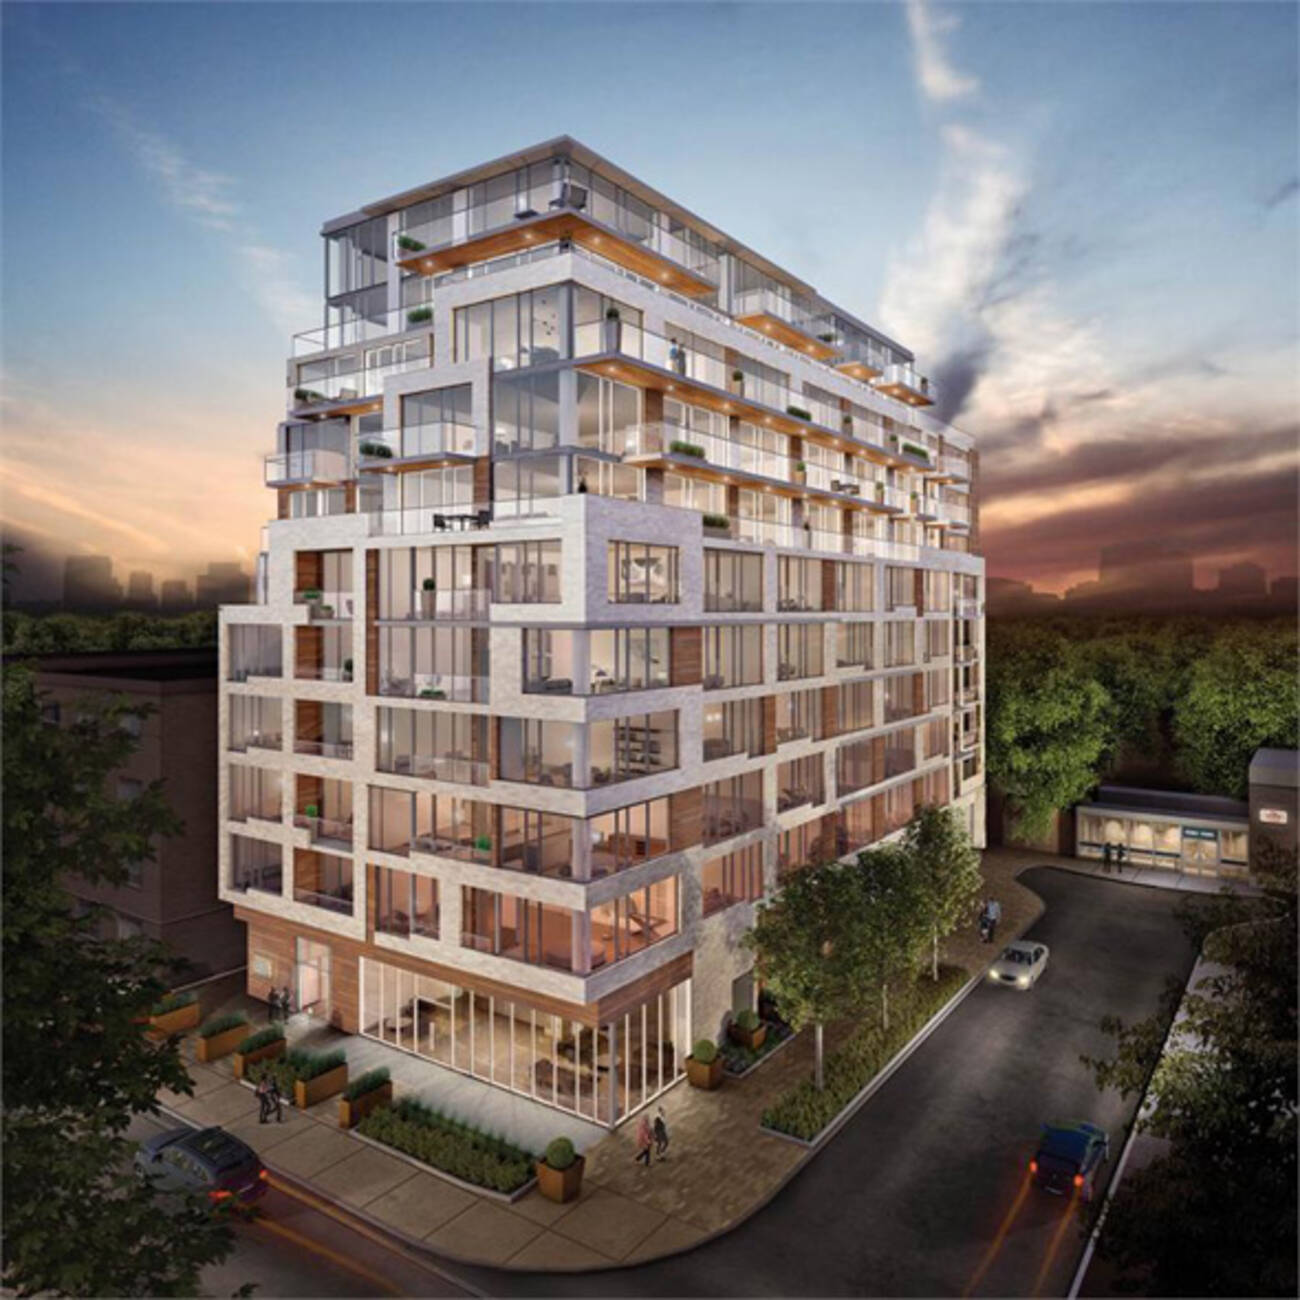 New in Toronto Real Estate The High Park